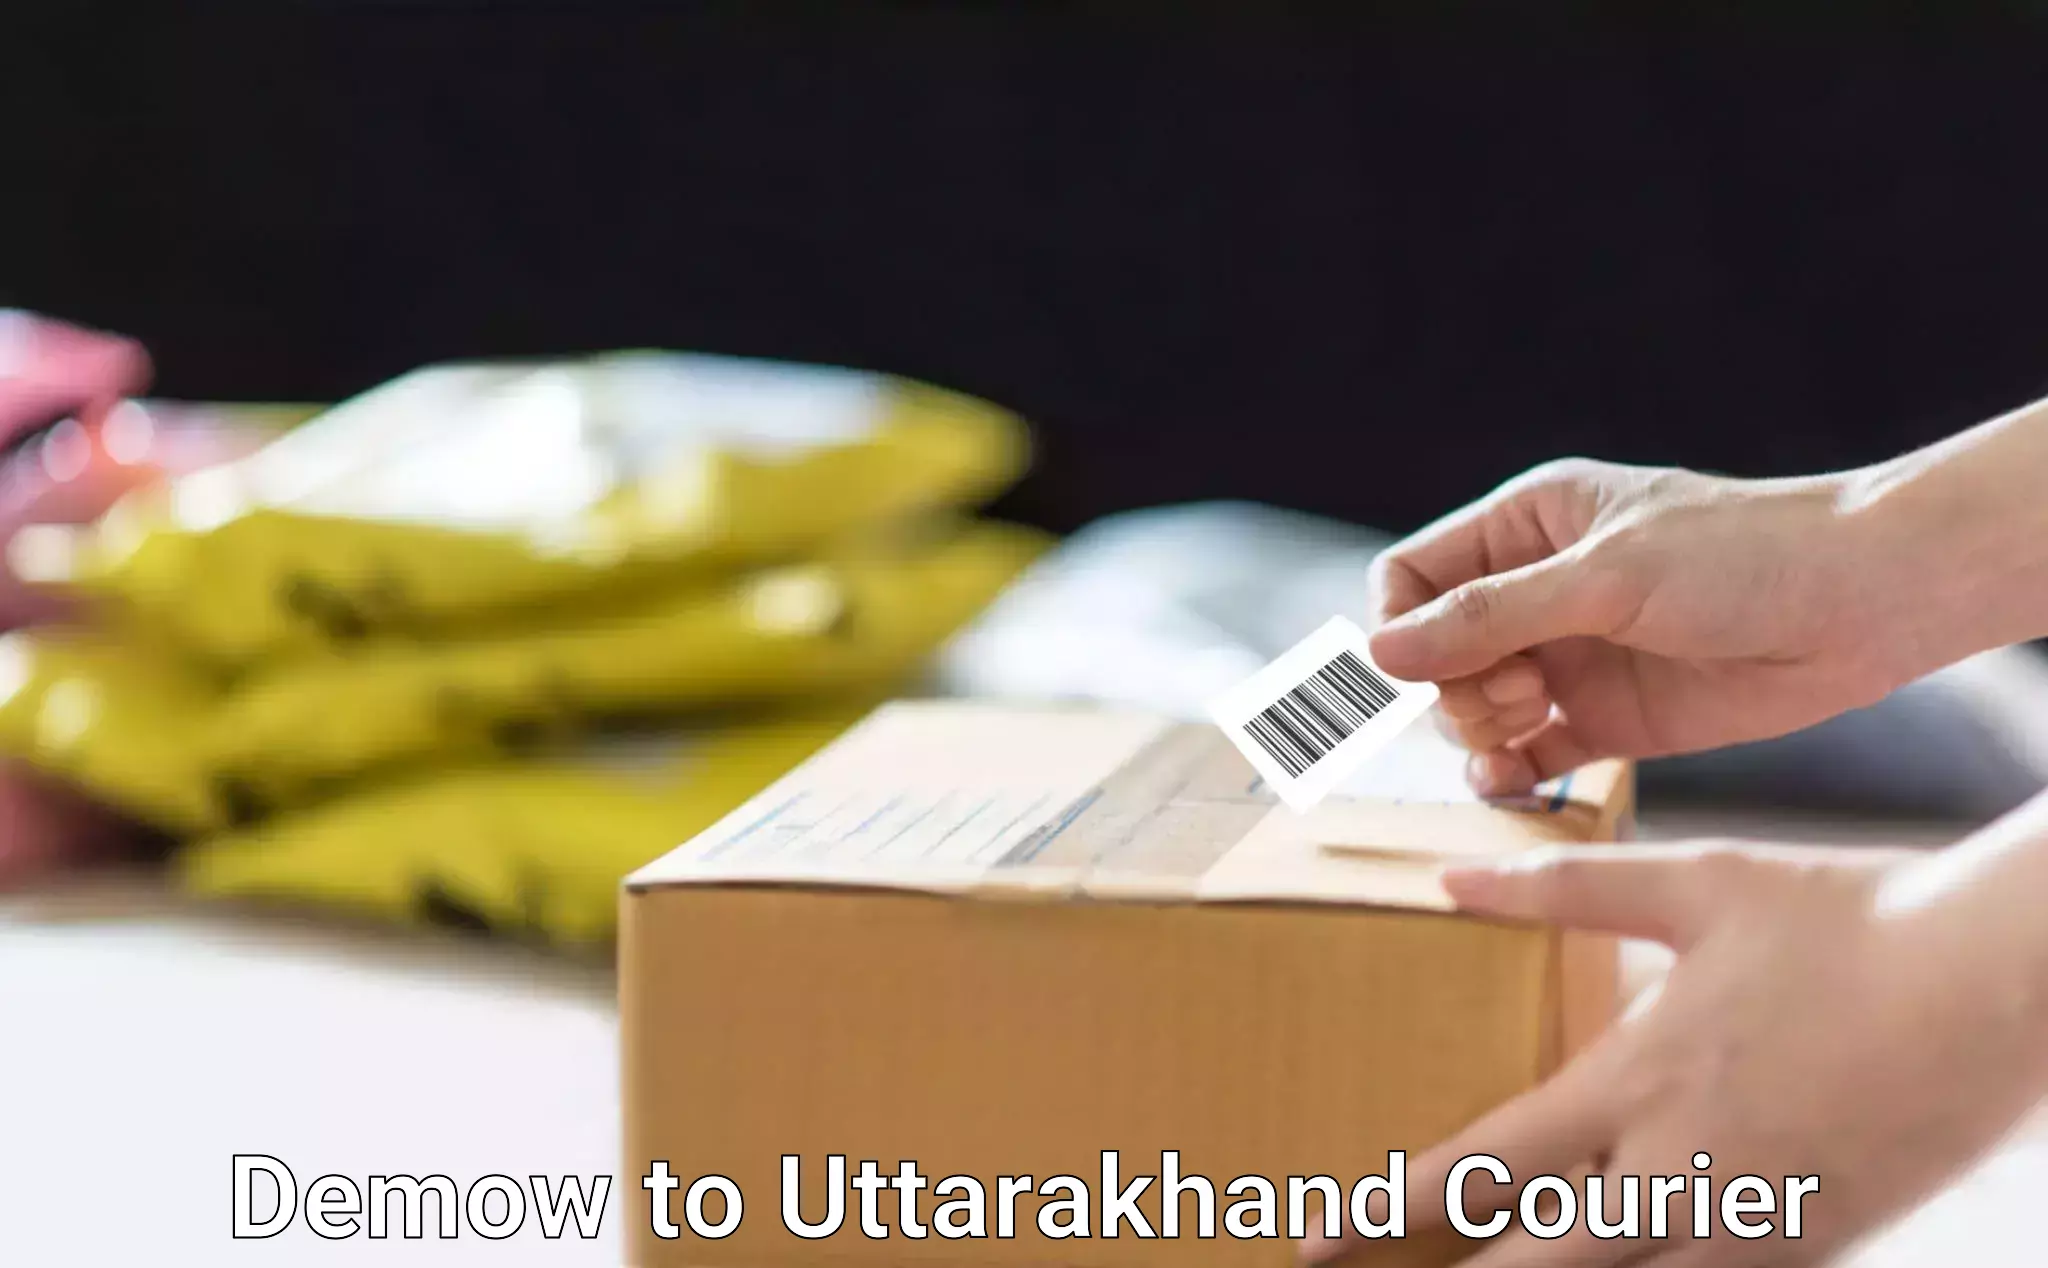 Next day courier Demow to Uttarakhand